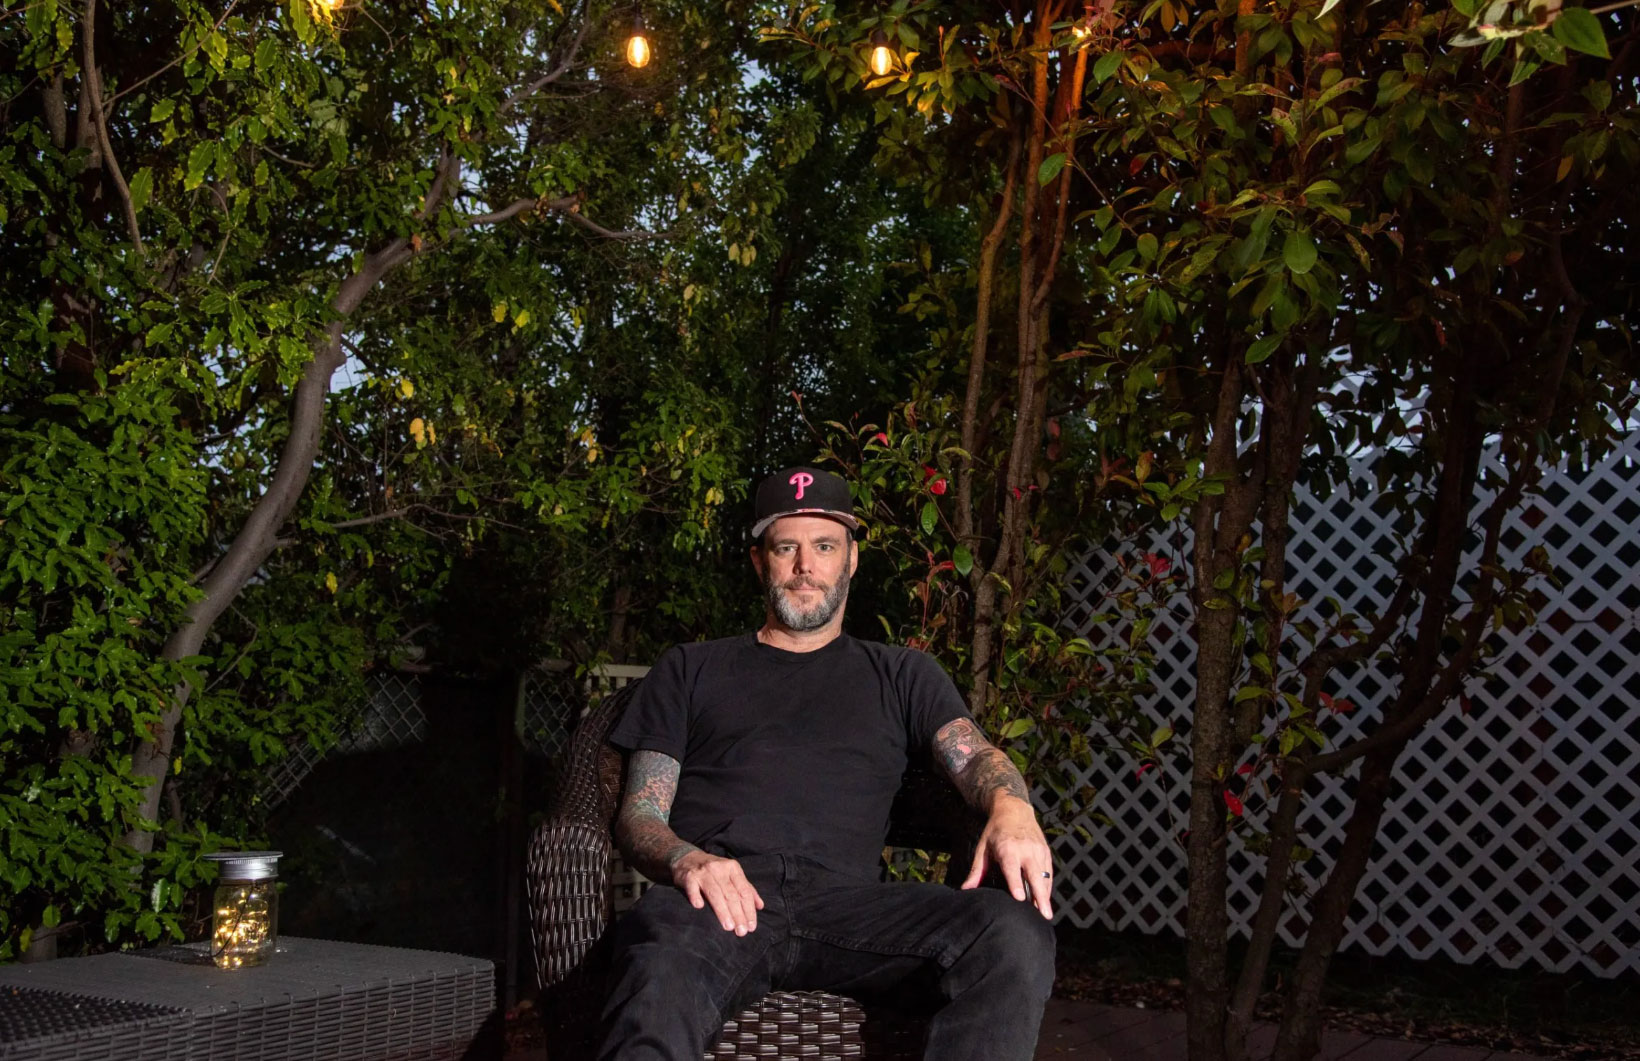 Bearded man sitting in a chair on a patio at night lighted by overhead string of lights